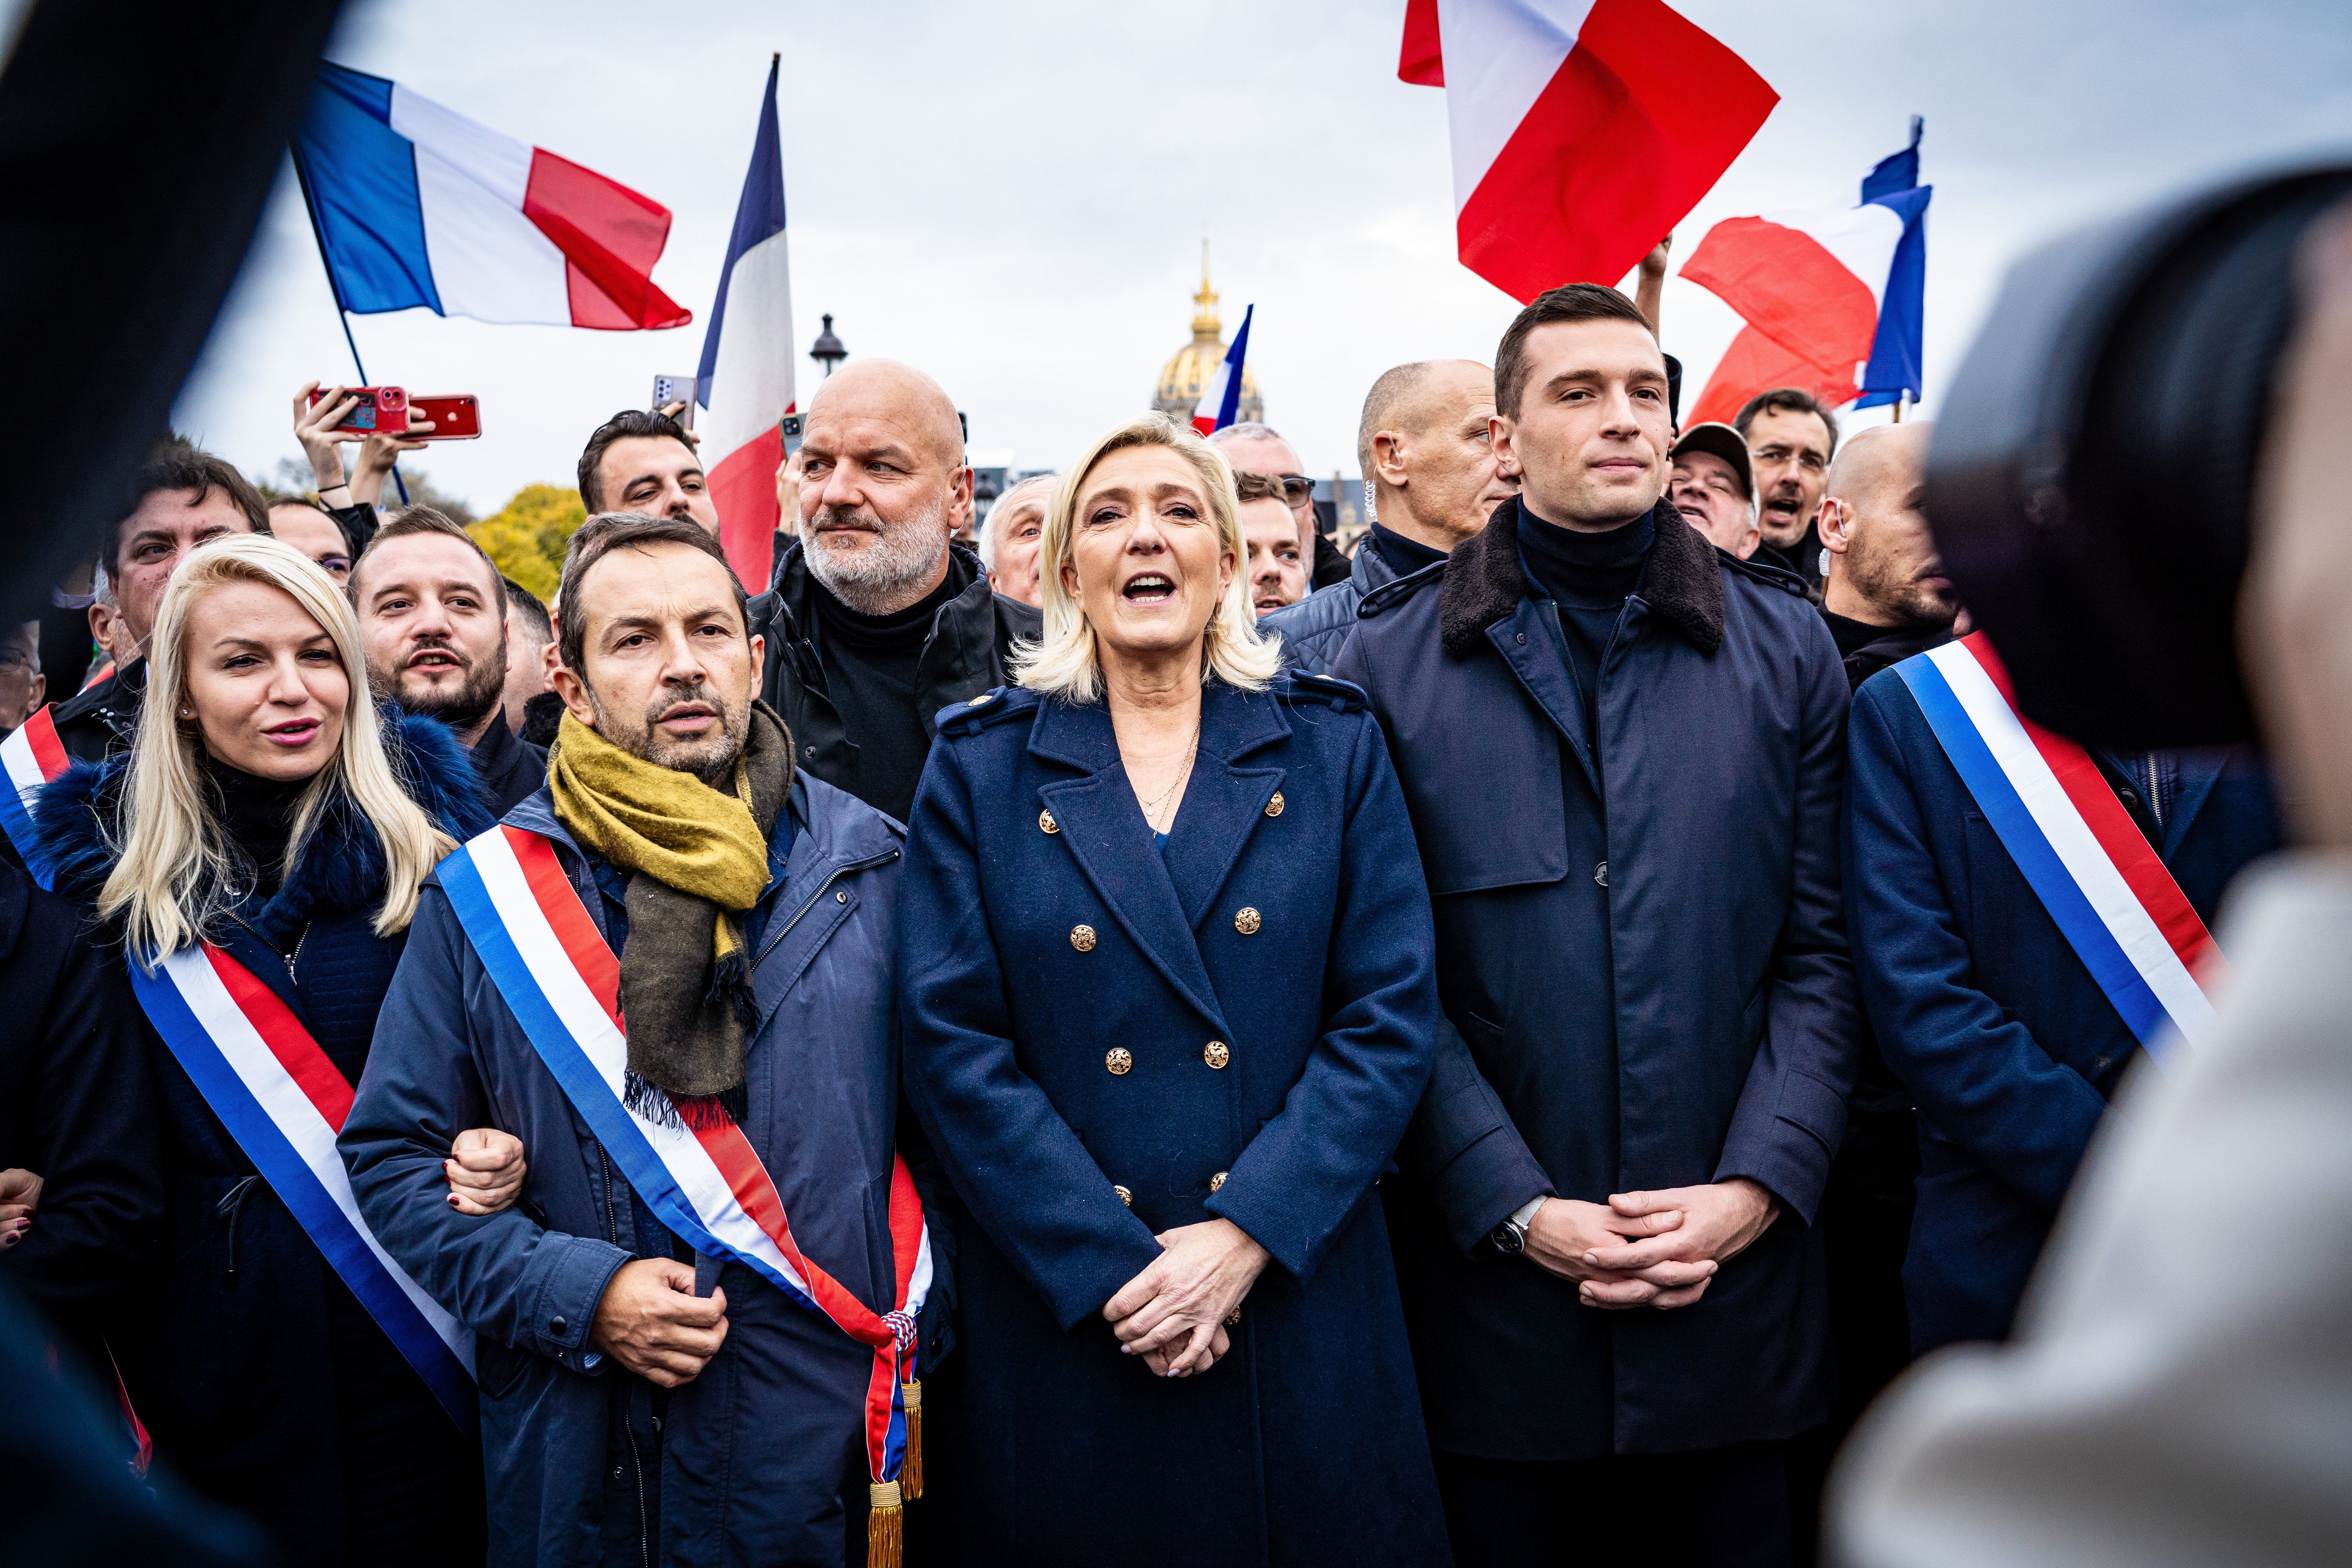 ​At a civic march against antisemitism in Paris this weekend, a far-right political procession saw Marine Le Pen, president and deputy of the Rassemblement National group (center) demonstrate along with her deputies, including Sebastien Chenu (left) and Jordan Bardella, president of the RN (right). 